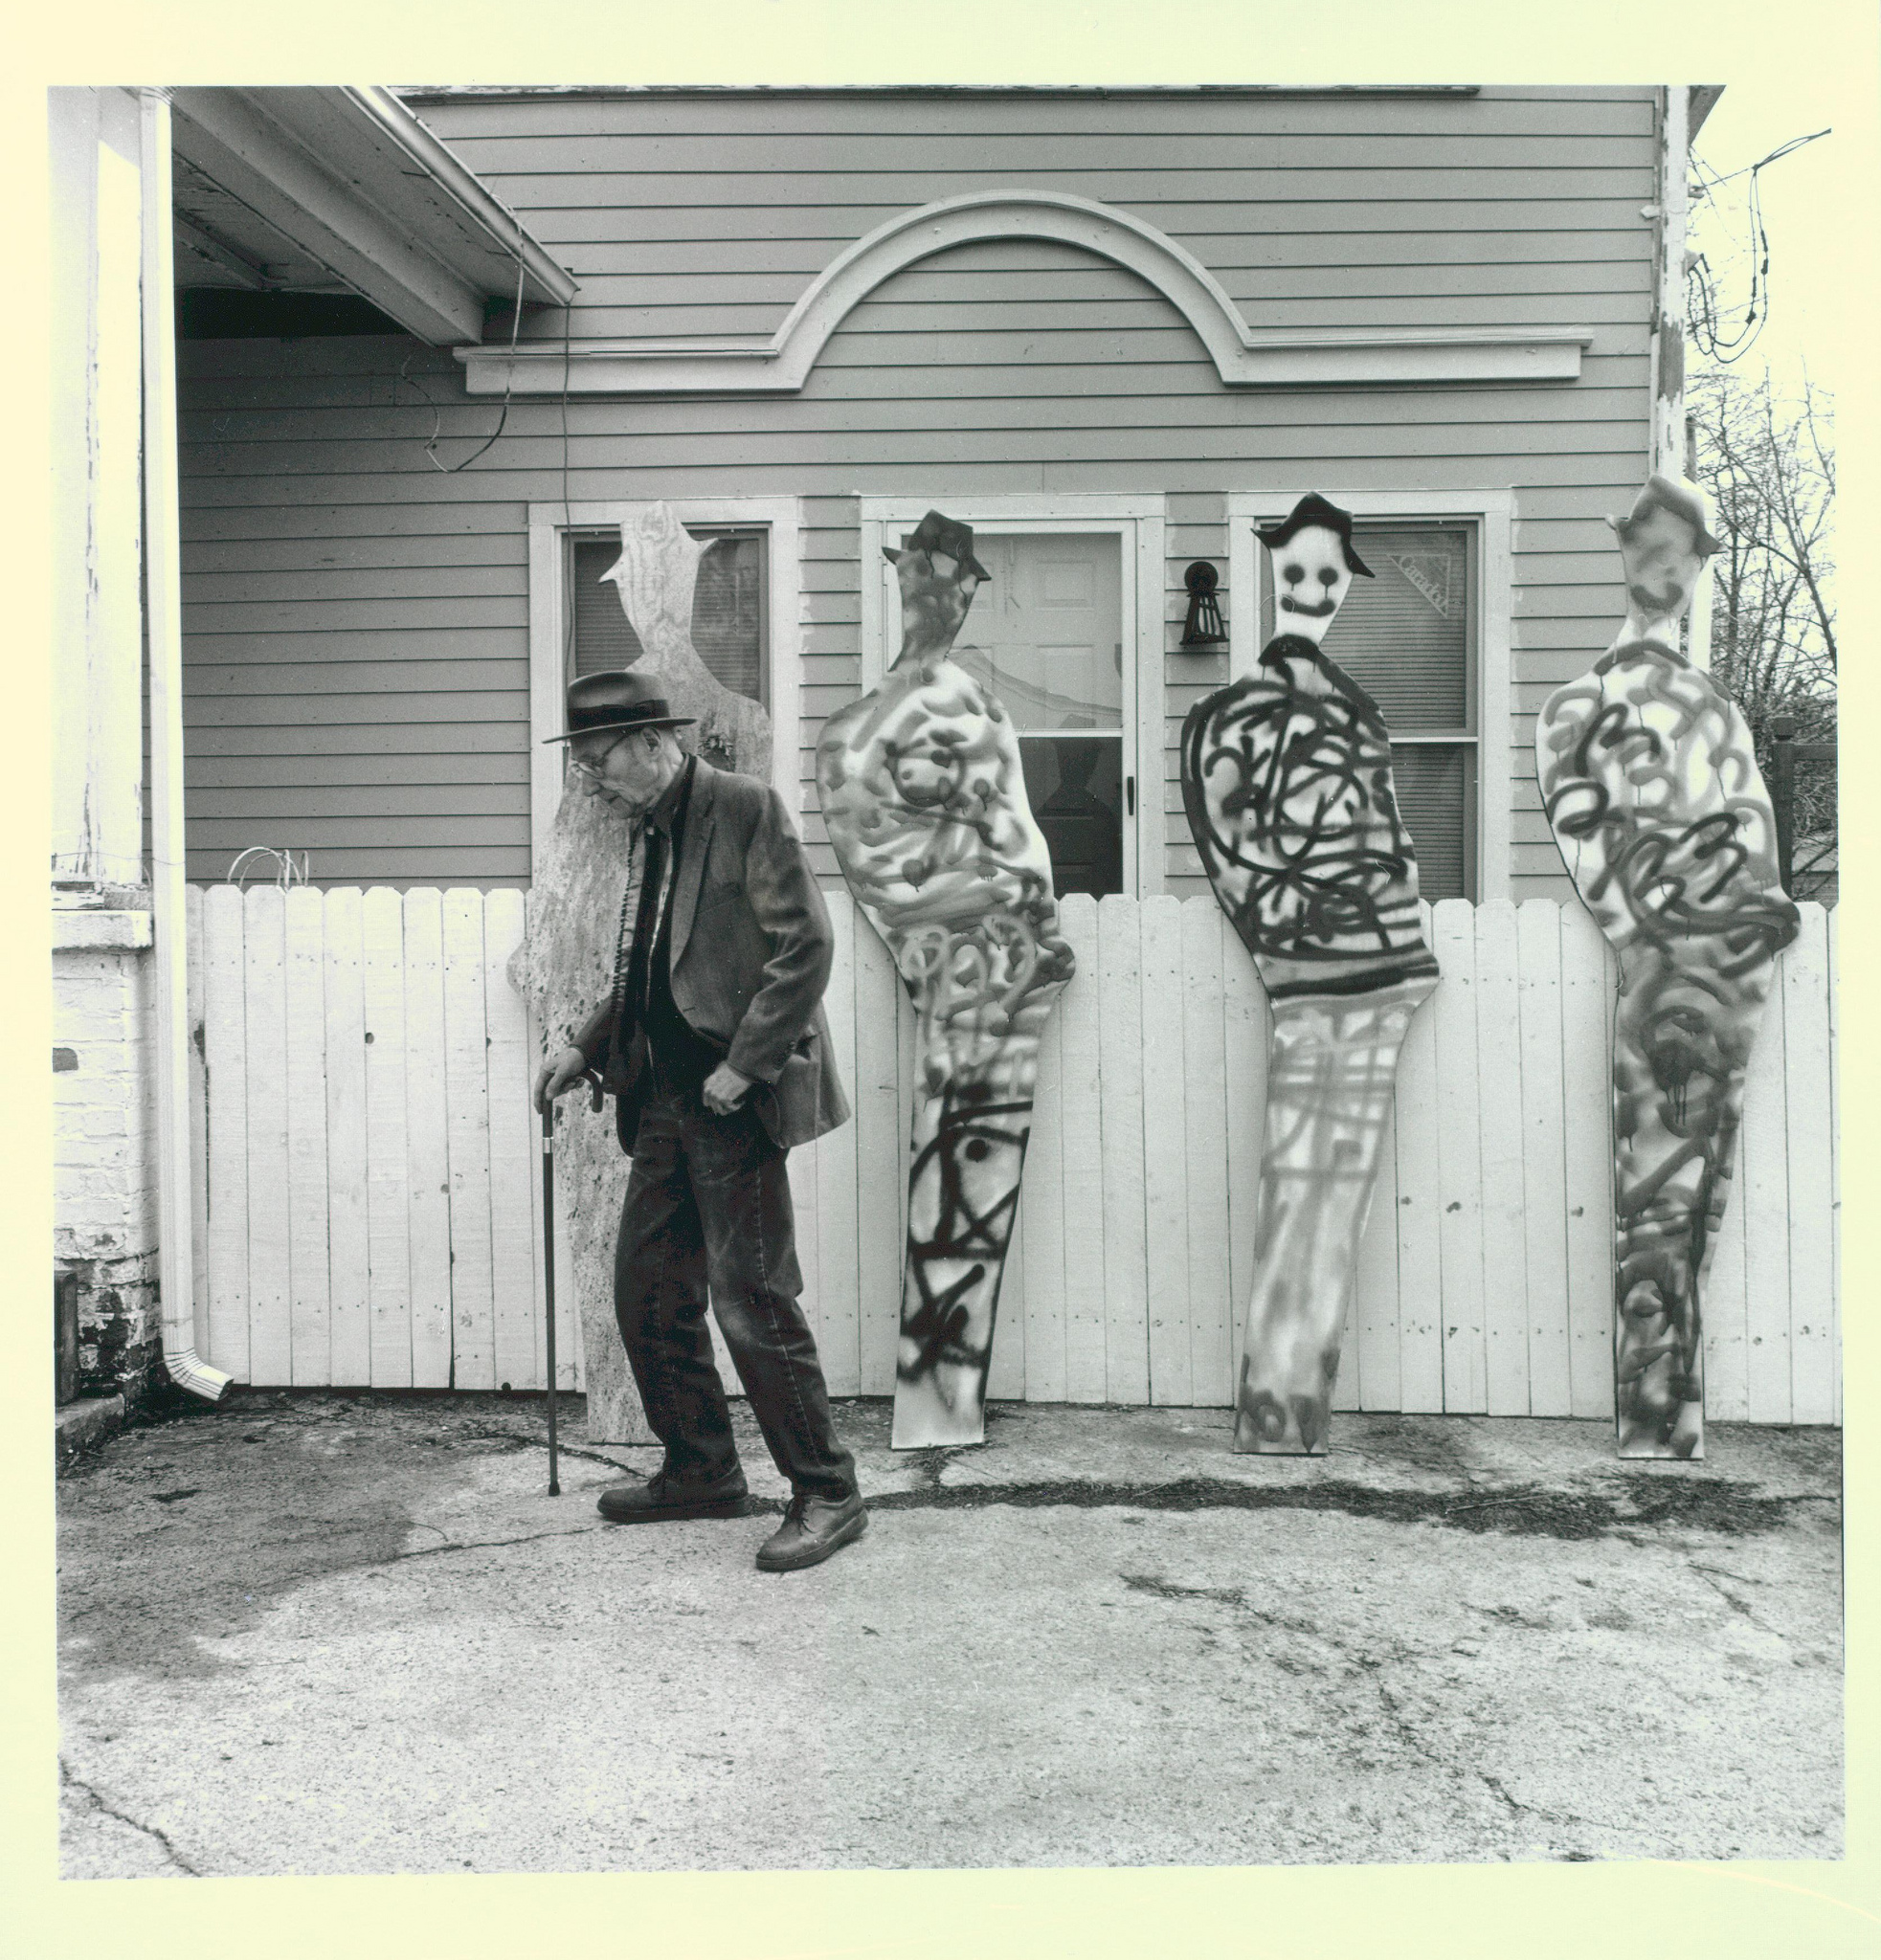 William Burroughs with picket fence and targets Variation 2, 1992